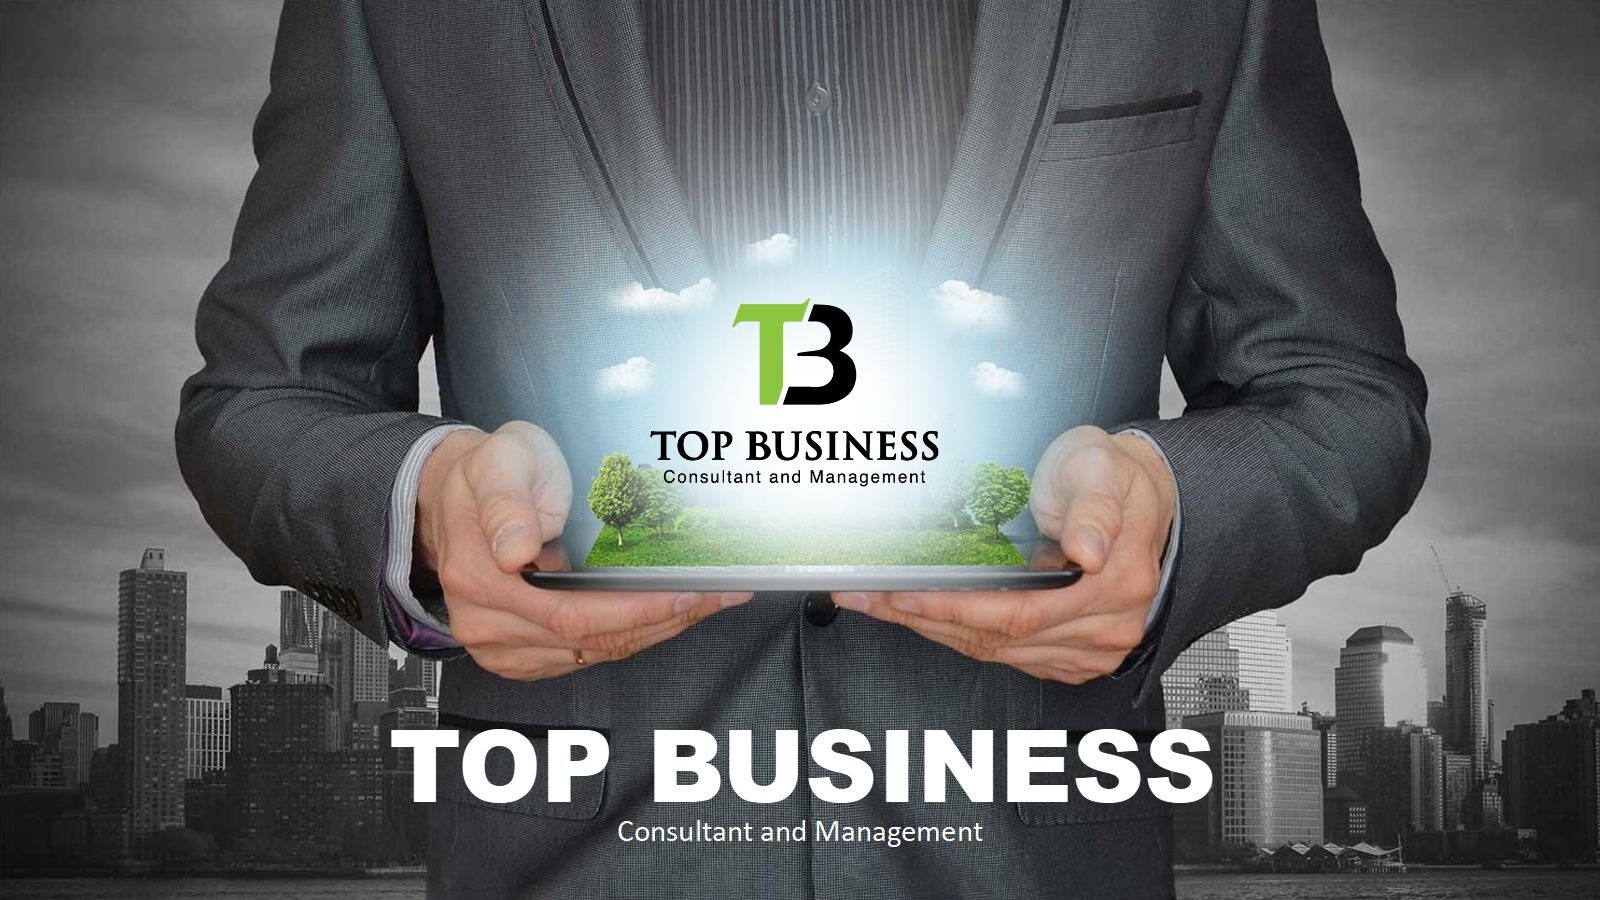 TOP BUSINESS